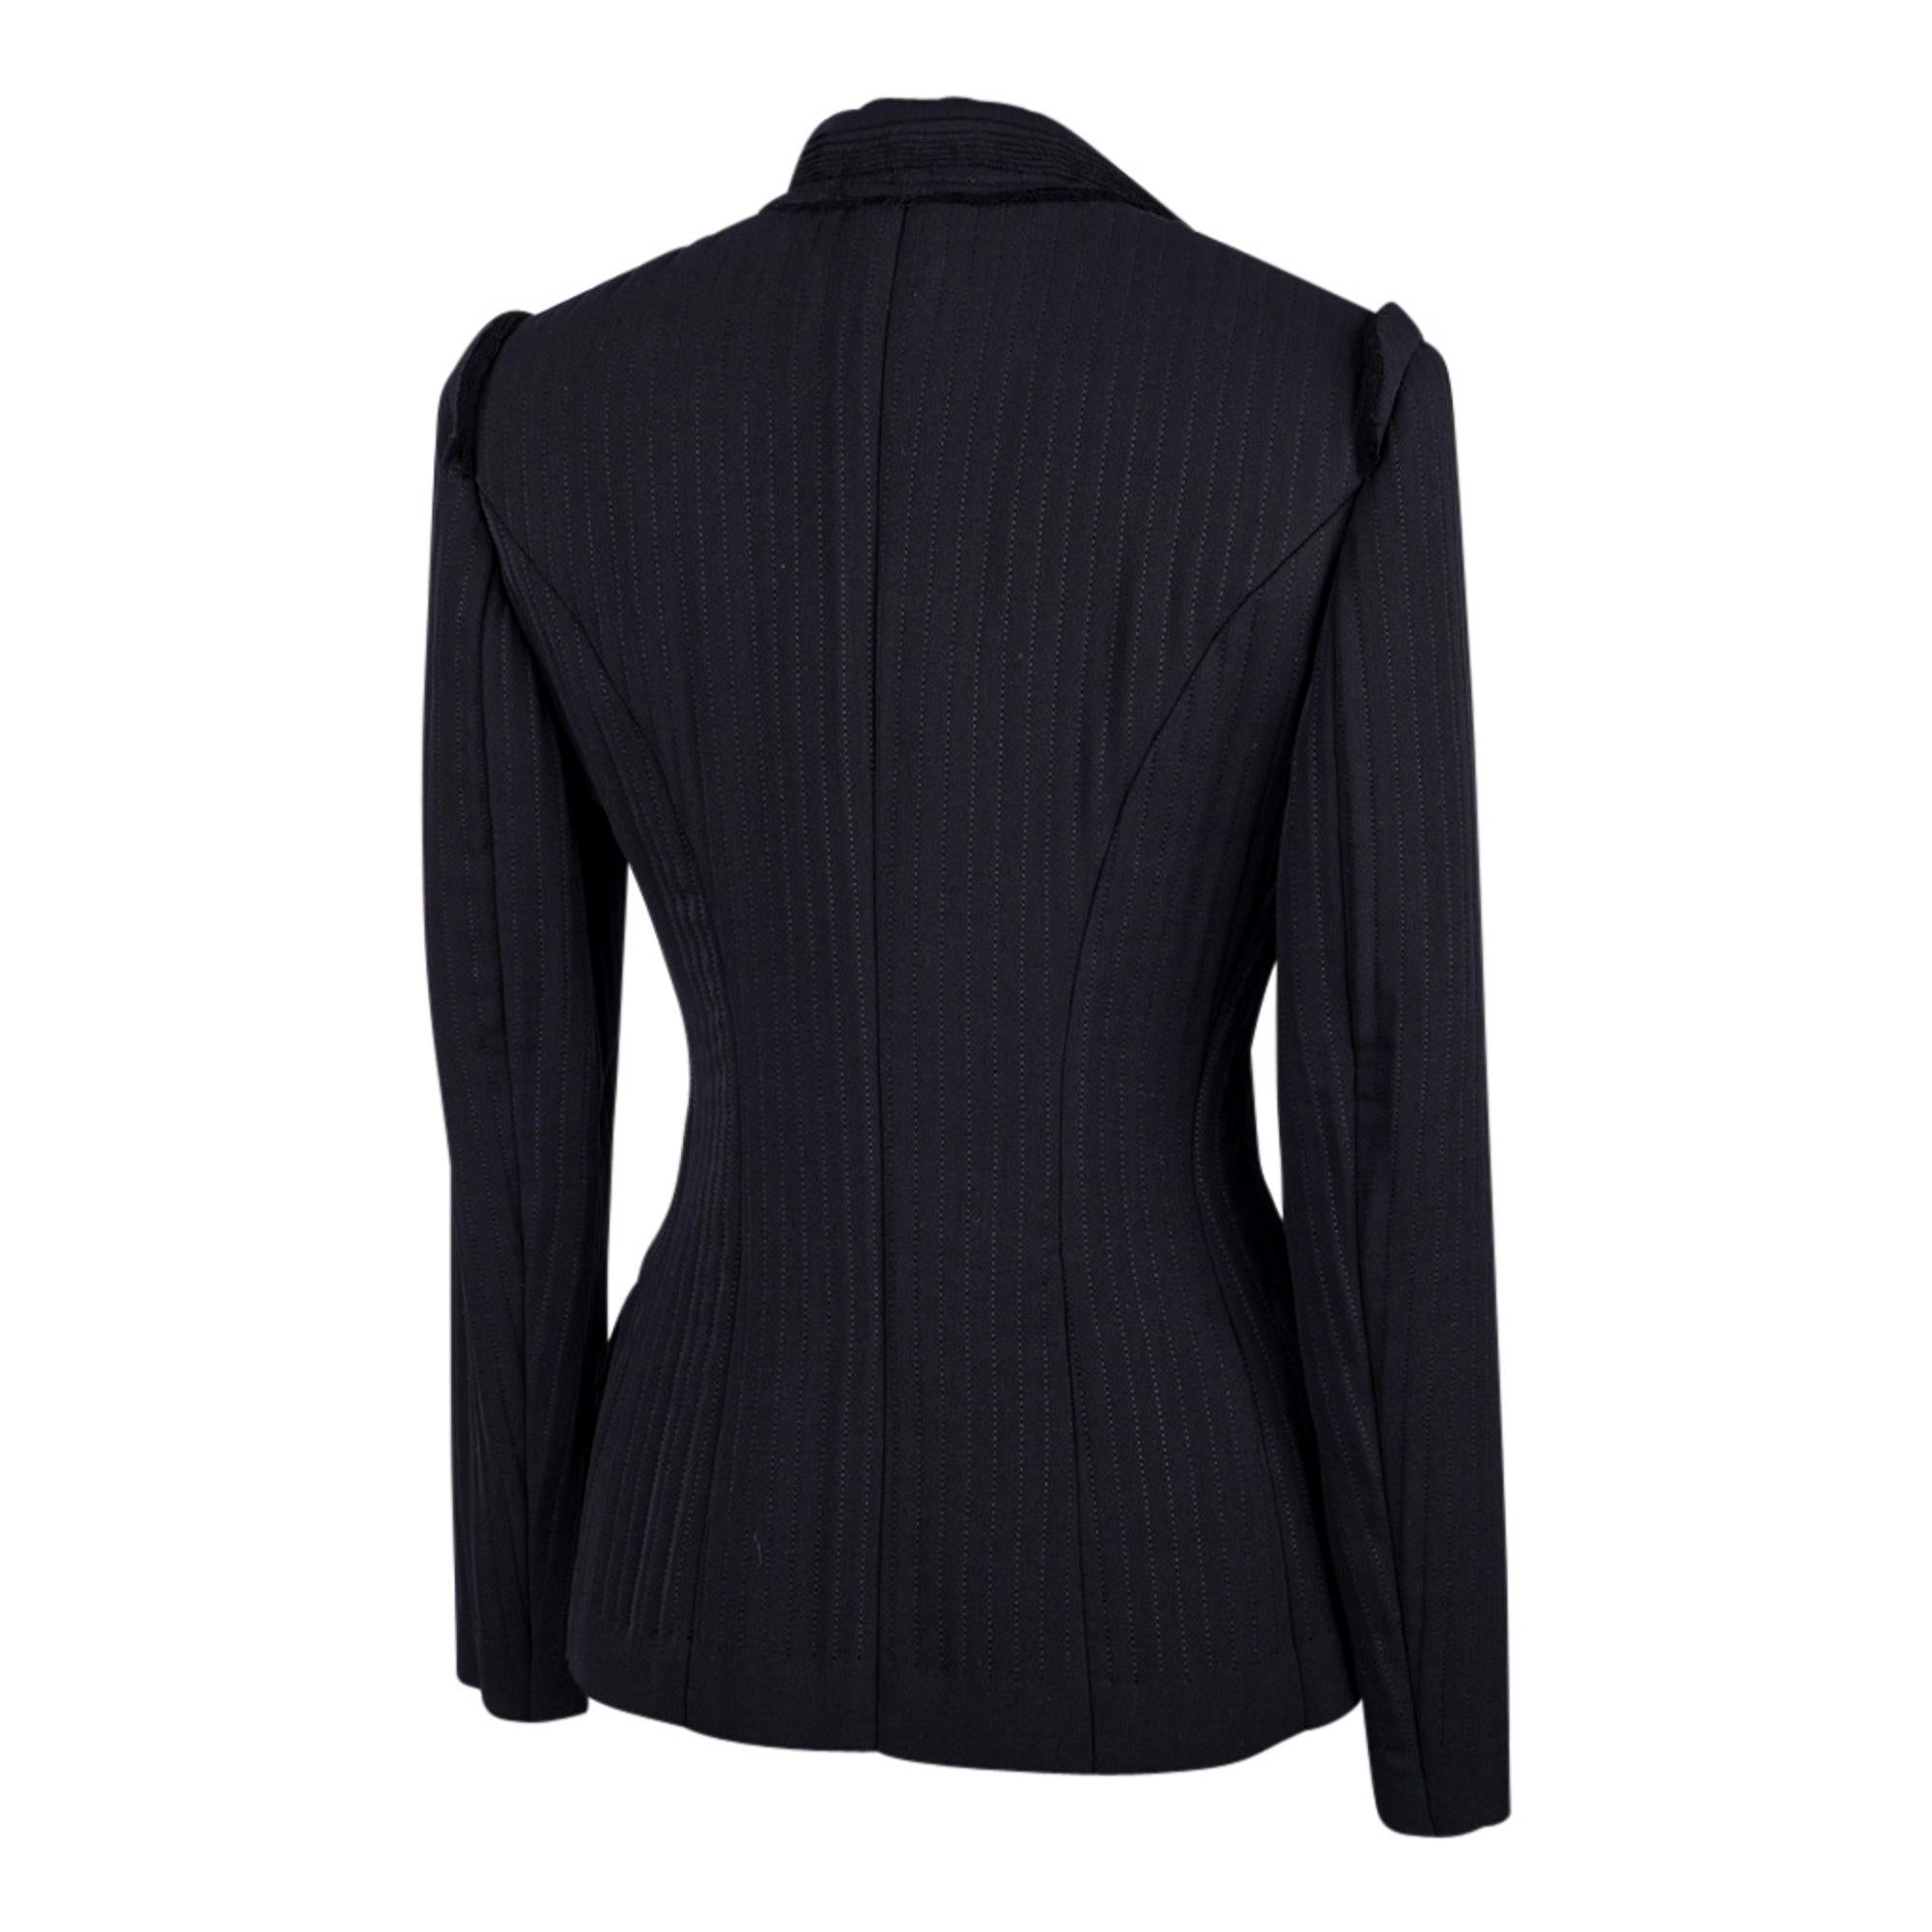 Yves Saint Laurent Jacket Exquisite Tom Ford Creation in Layers 36 8